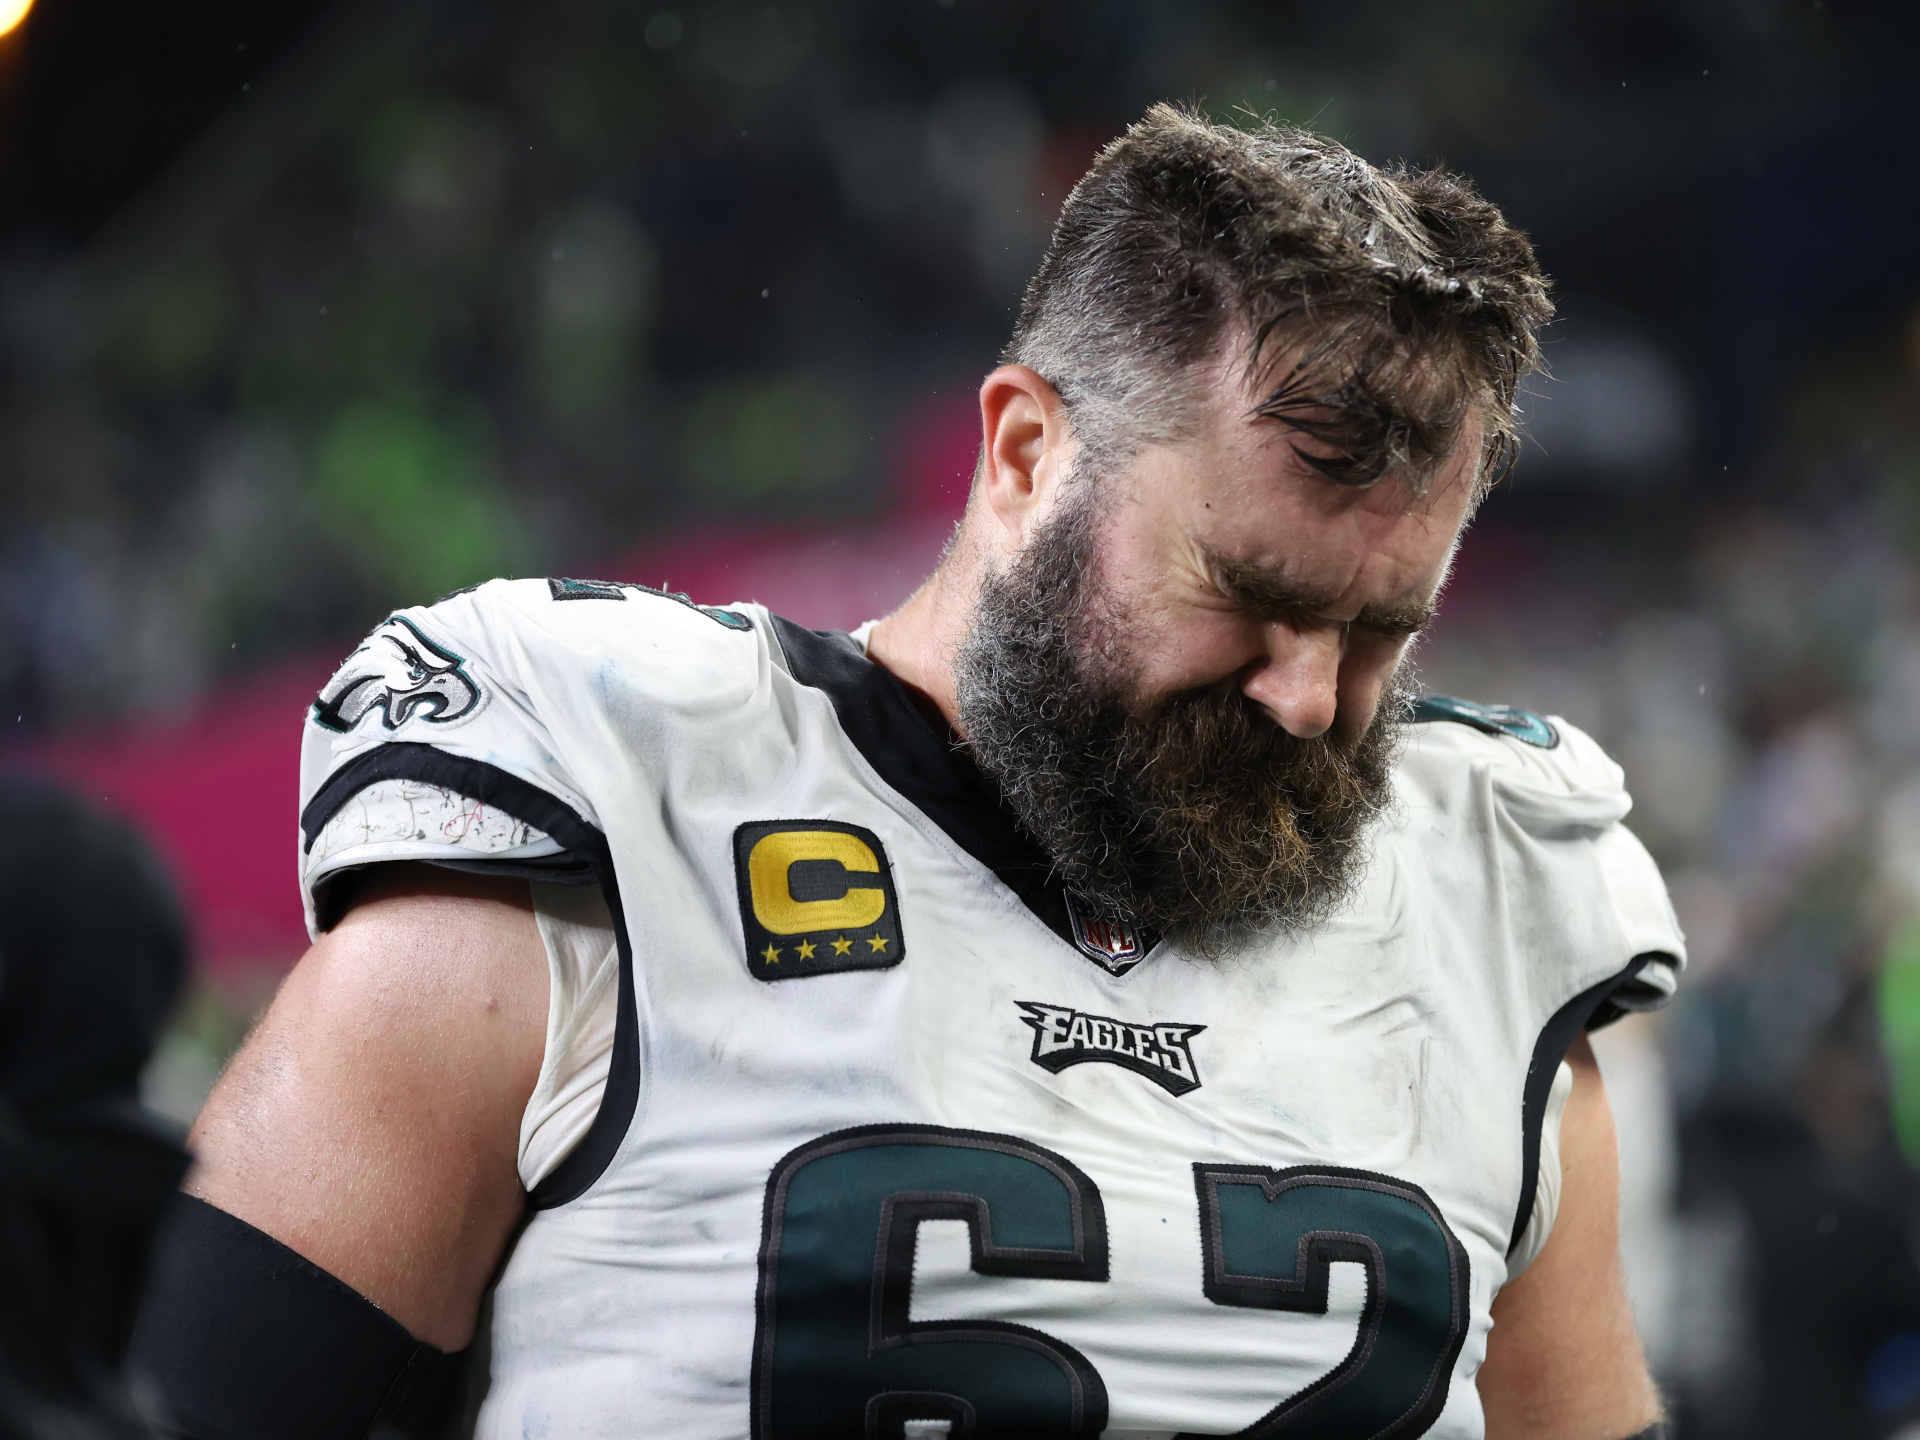 Jason Kelce admitted on his New Heights podcast that the infamous Eagles Tush Push play really was an unfair play and that he cheated on every single play.